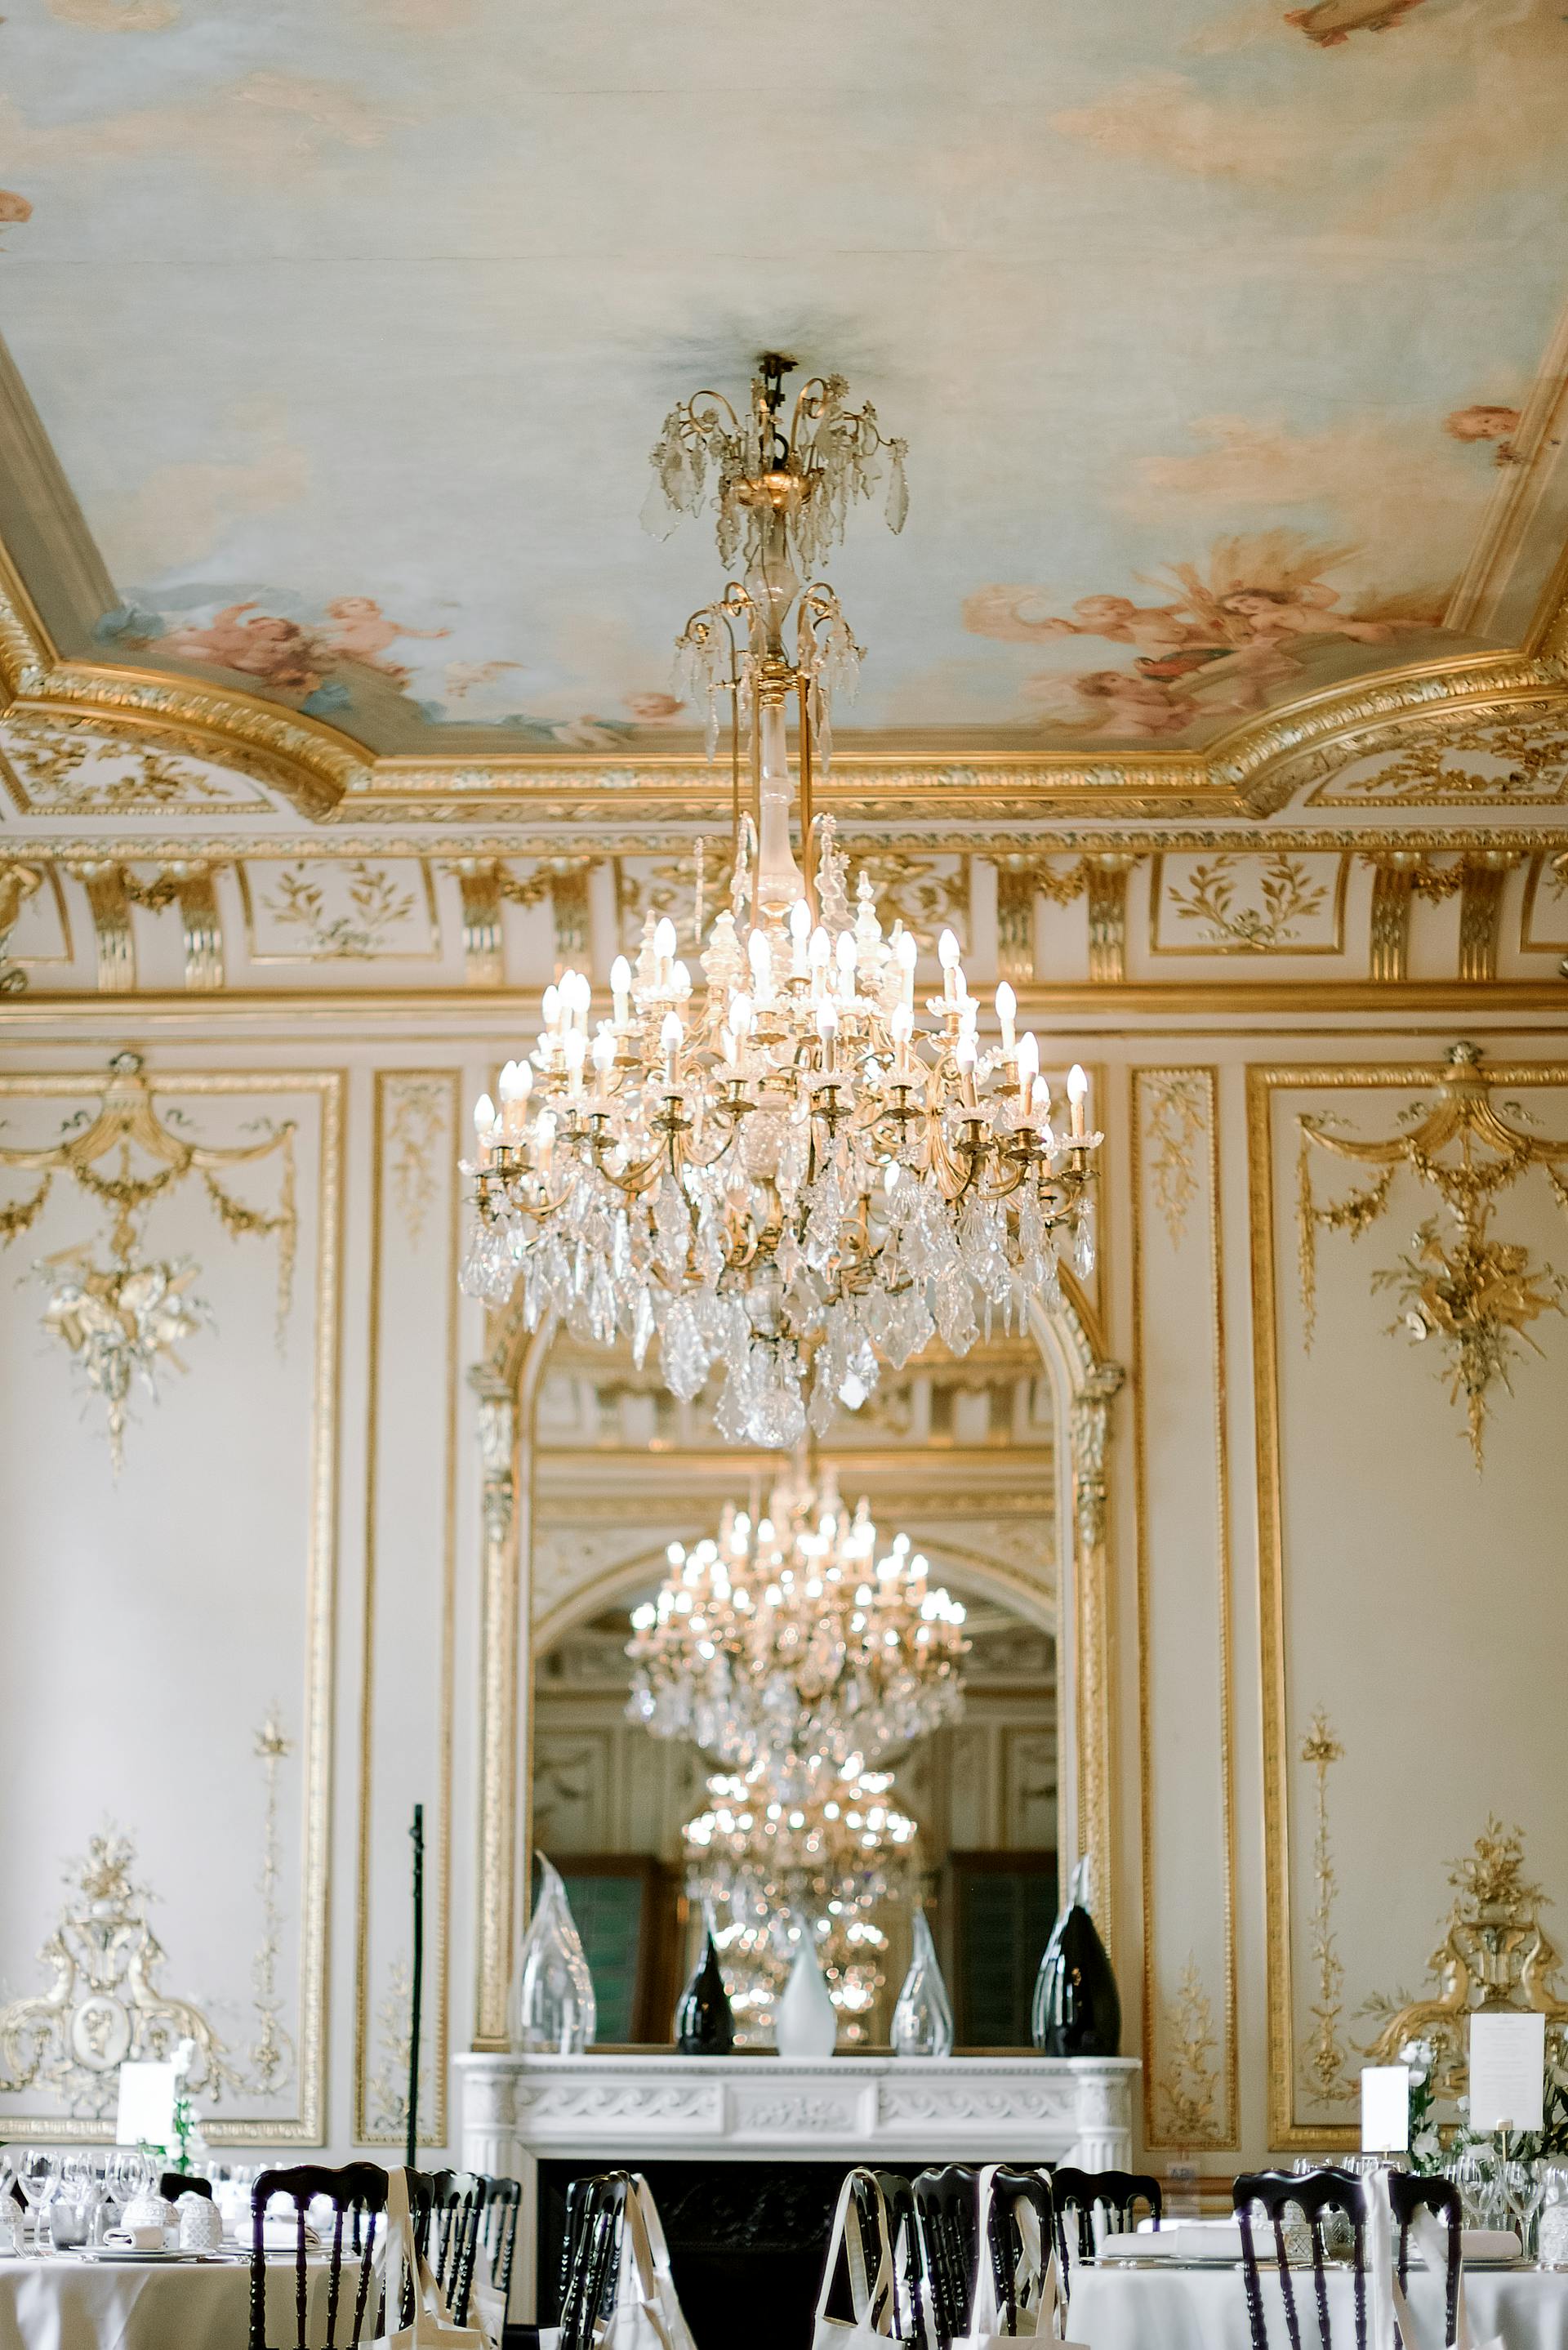 The interior of an elegant restaurant with golden ornaments and crystal chandeliers | Source: Pexels